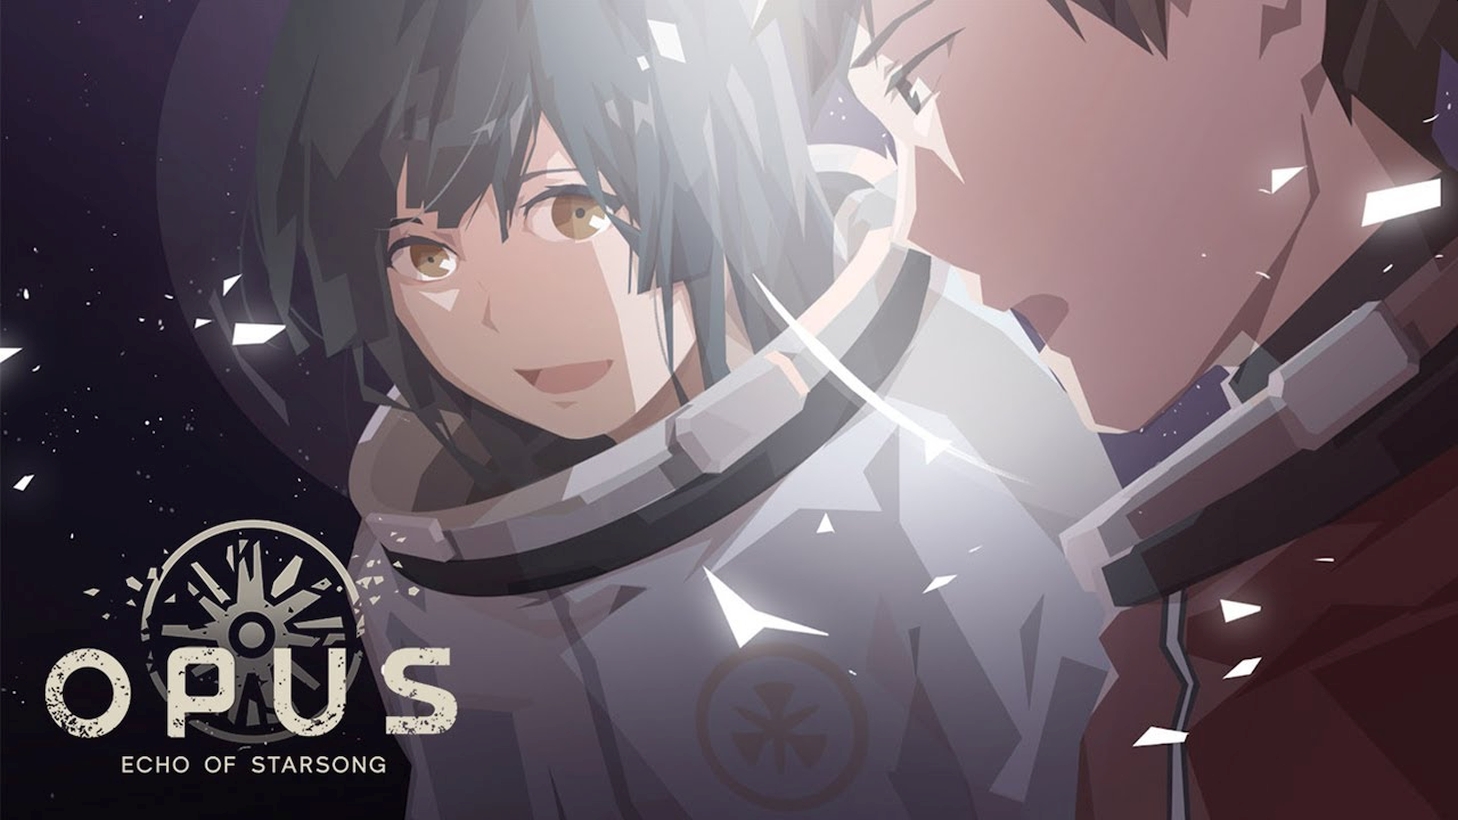 Next Opus Game OPUS: Echo of Starsong Announced With Teaser Trailer